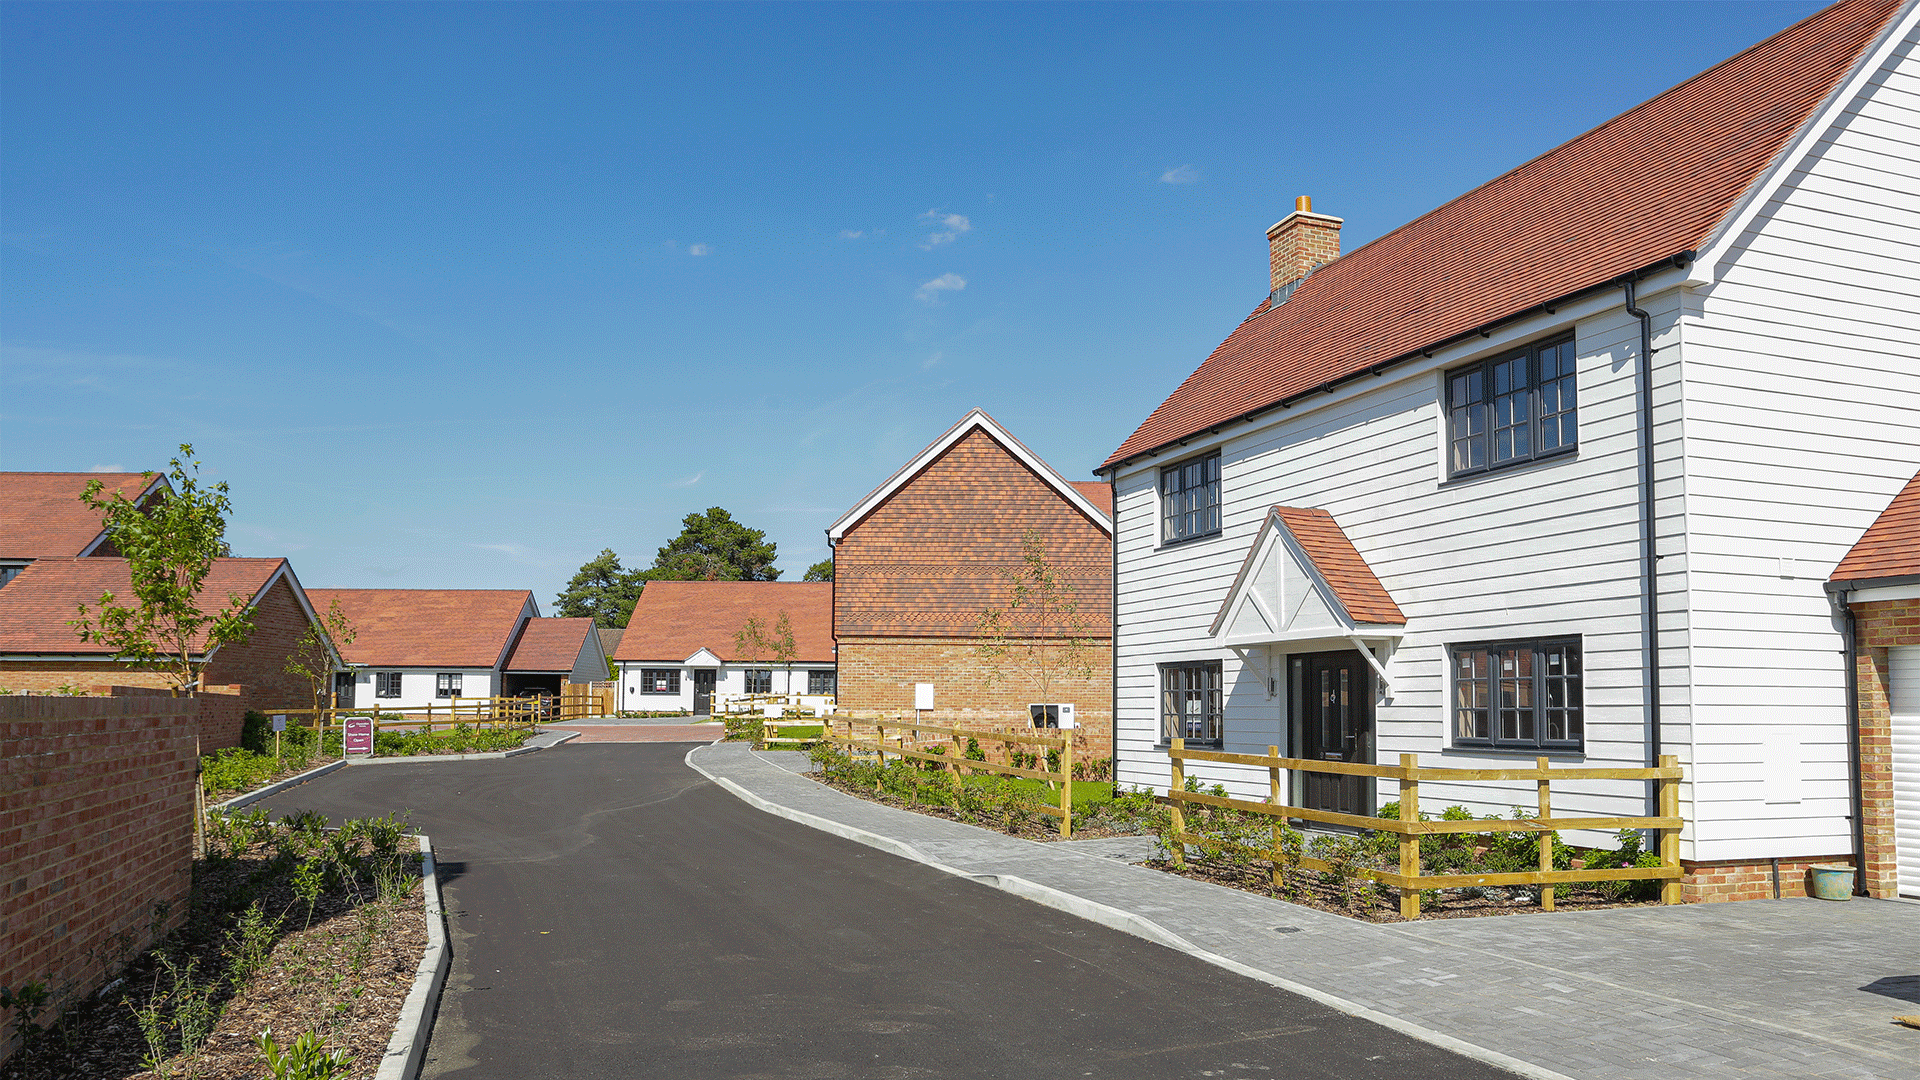 Miller's Meadow Street View featuring a large white detached house and facing down a sunny road